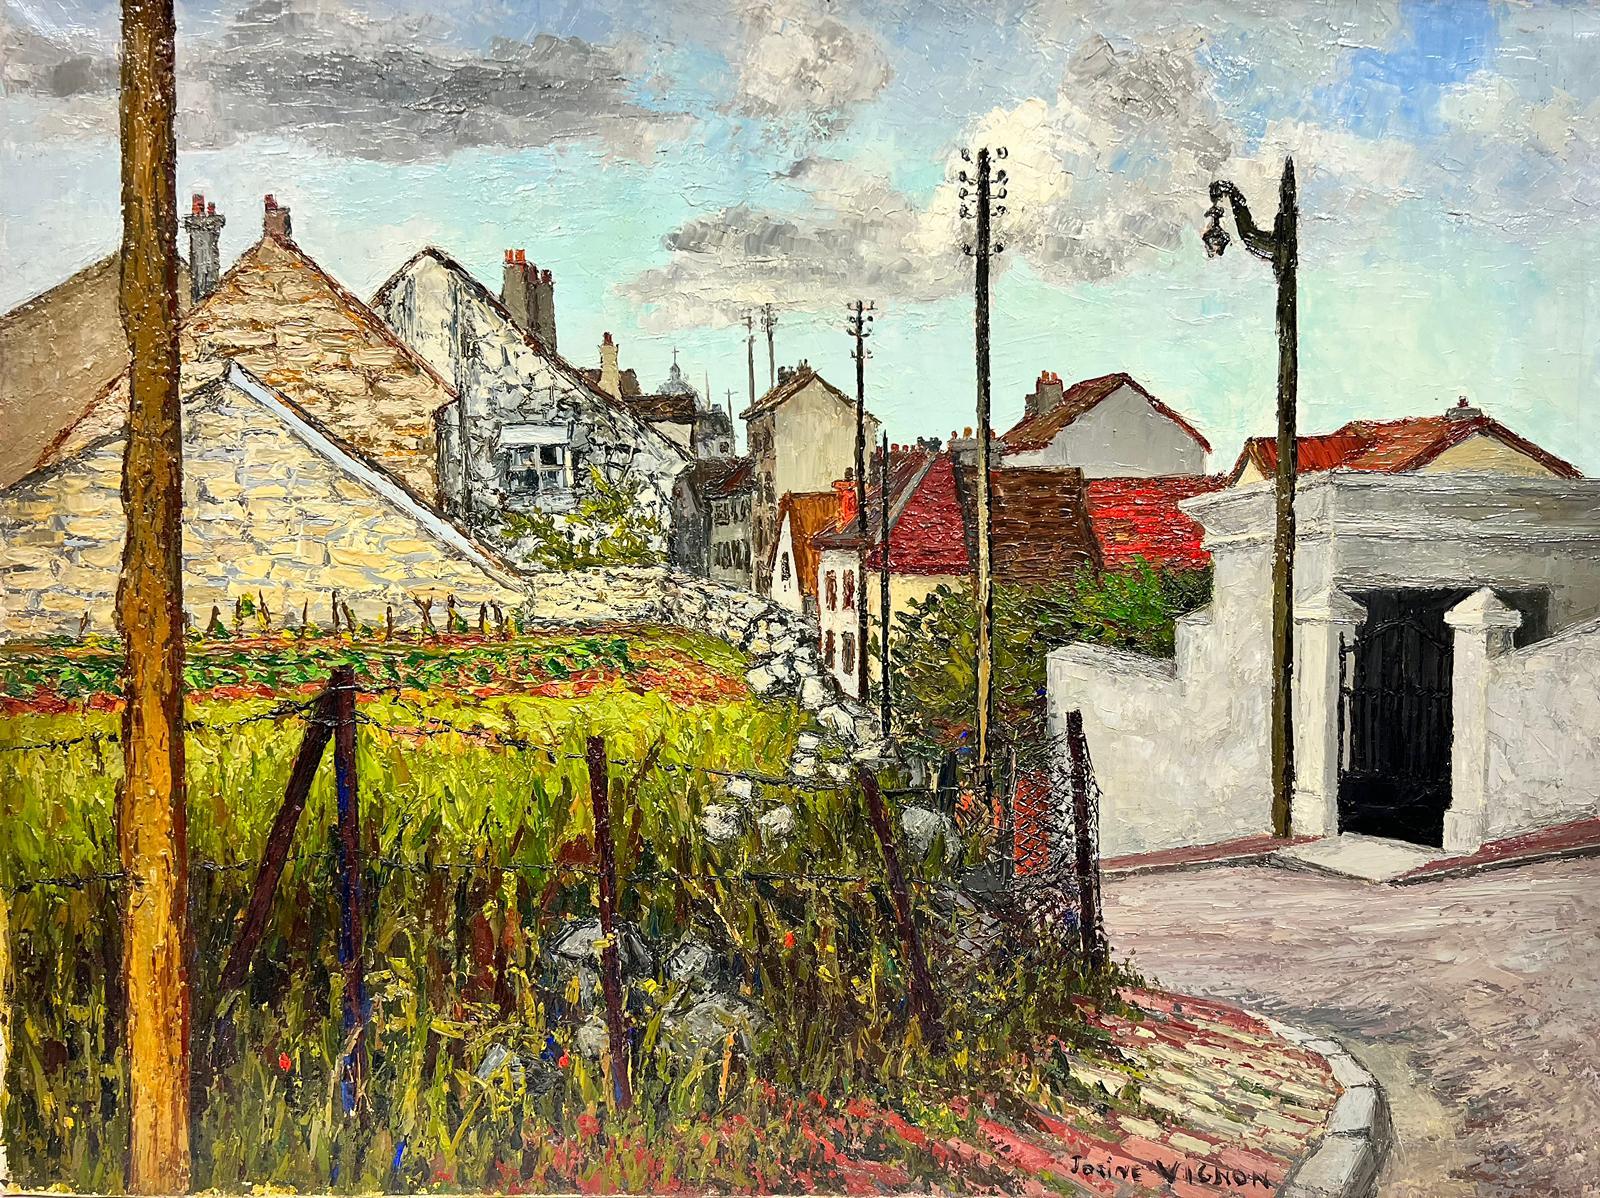 Josine Vignon Landscape Painting - Mid Century French Post Impressionist Oil Rural French Town Street Scene